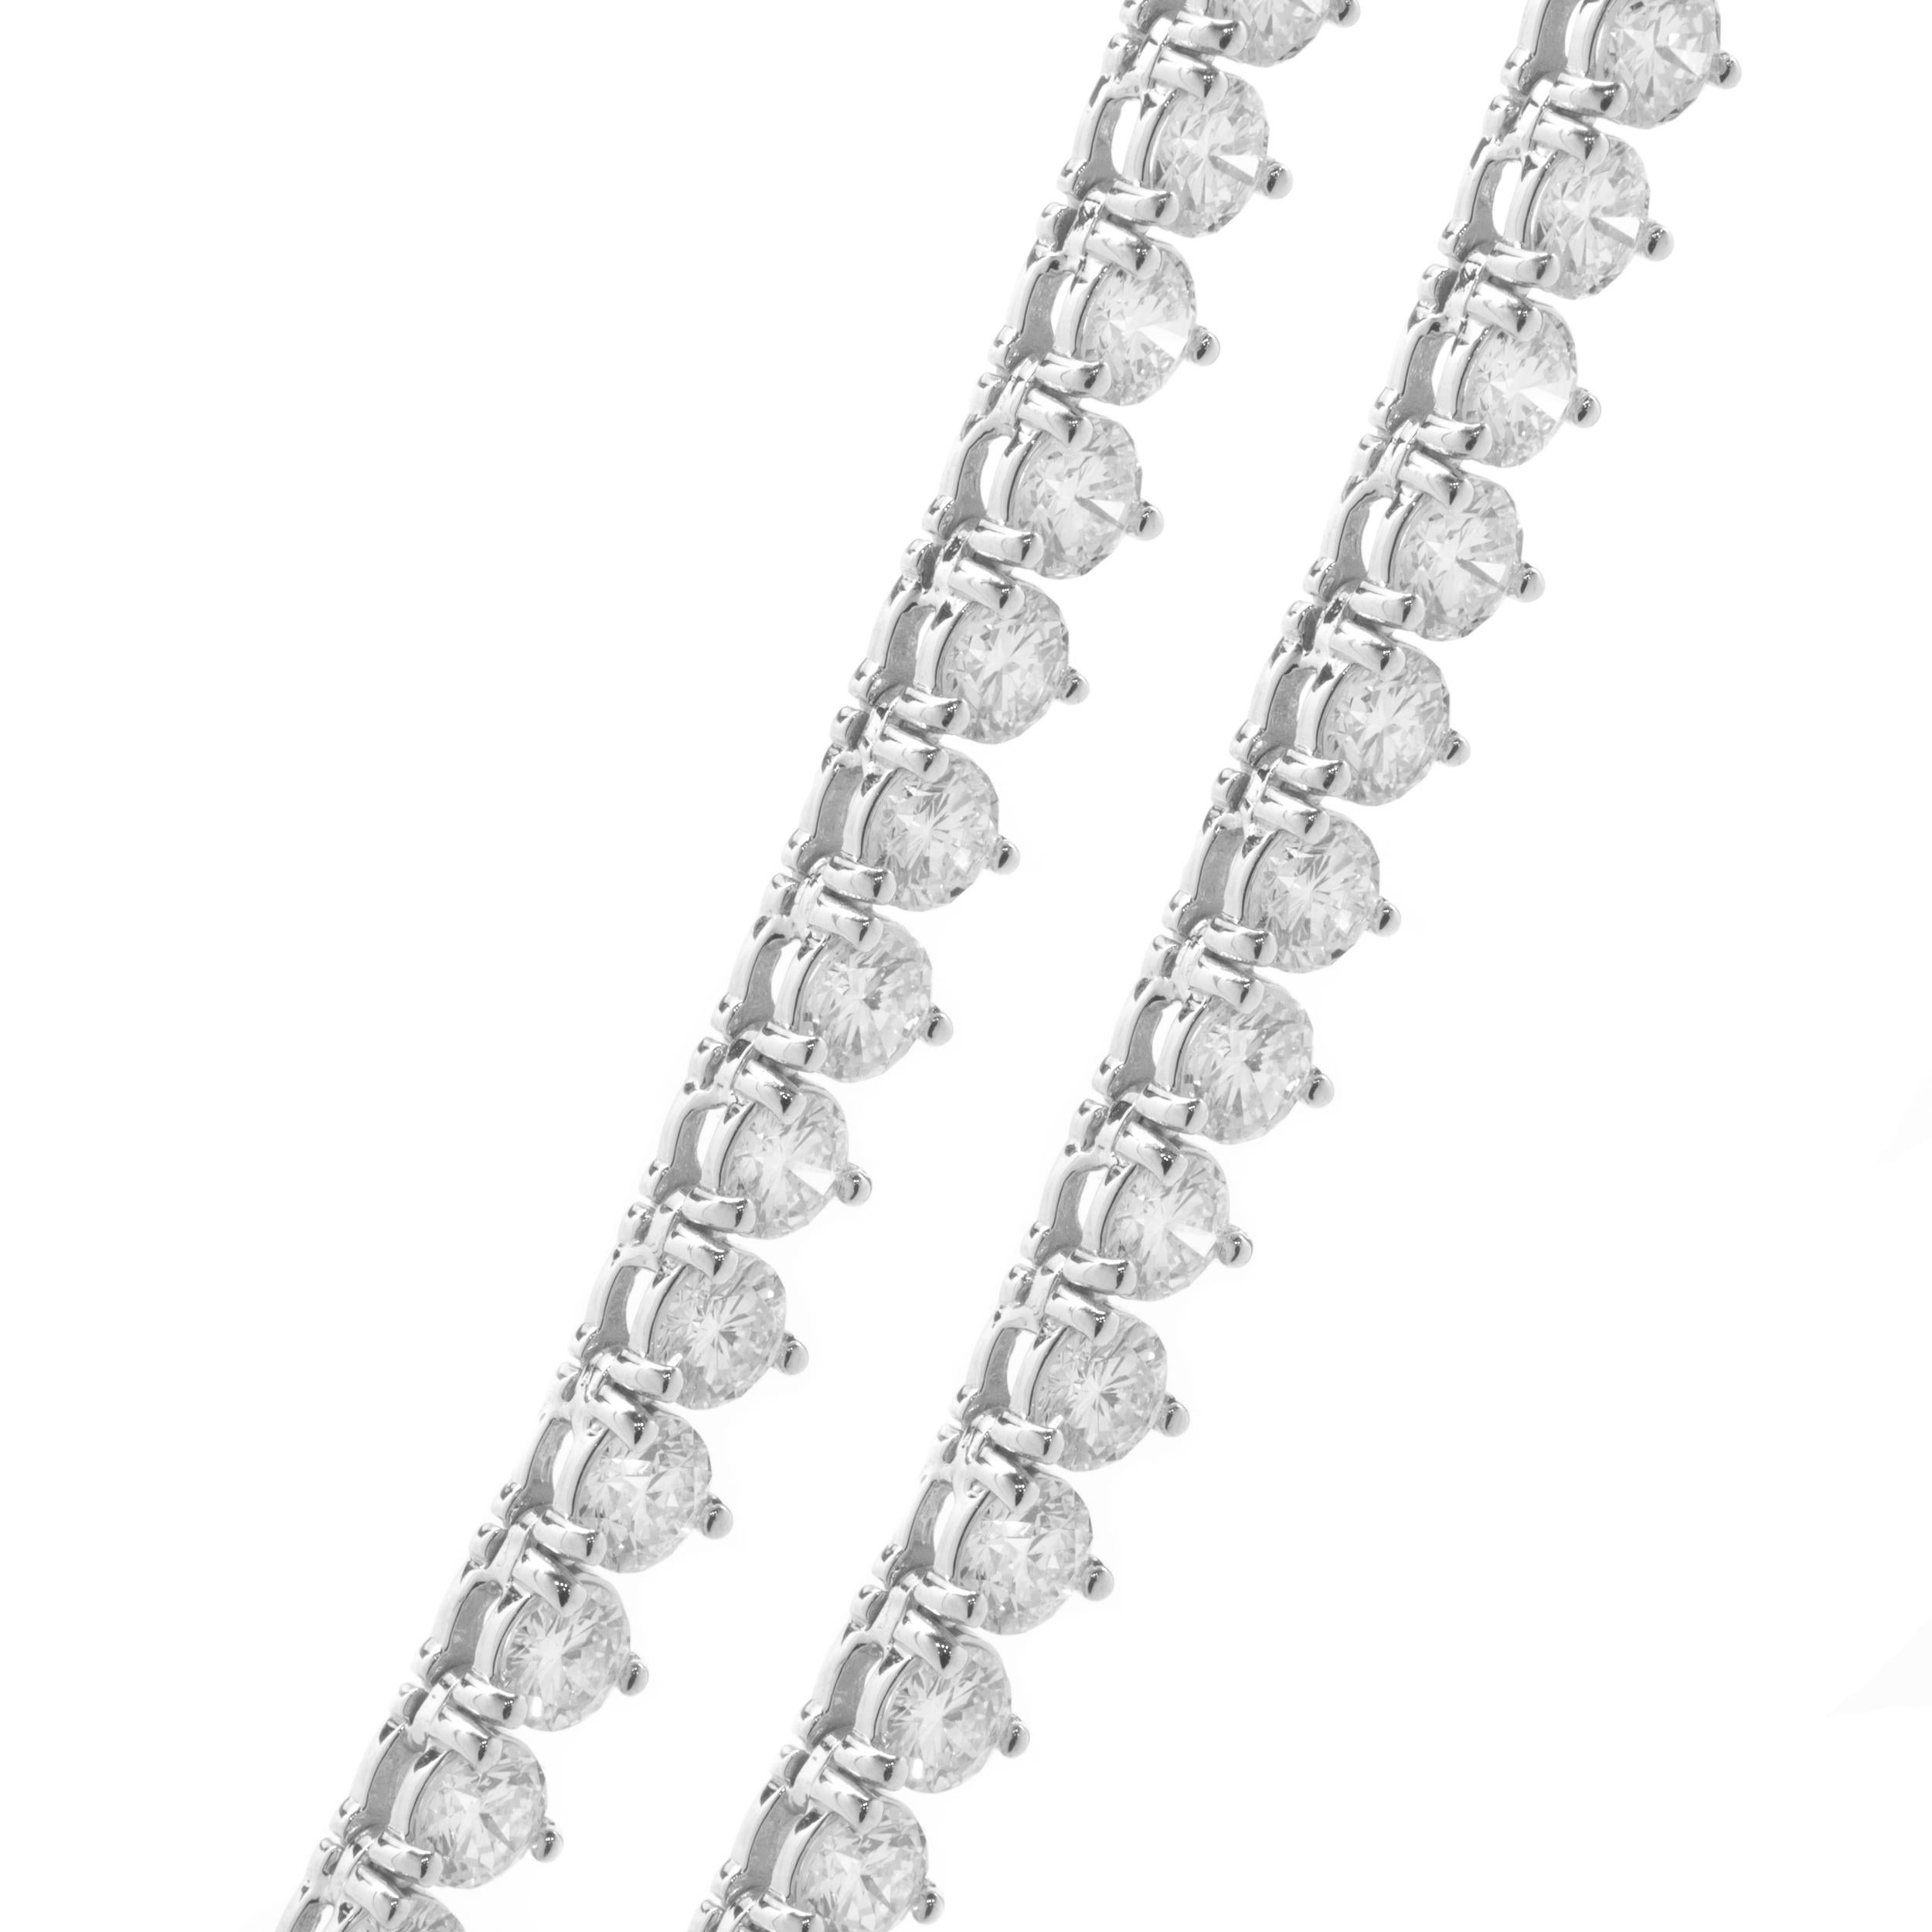 Designer: custom design
Material: 18K white gold
Diamond: 111 round brilliant cut = 17.11cttw
Color: G /  H
Clarity: VS2
Dimensions: necklace measures 17-inches in length 
Weight: 28.07 grams